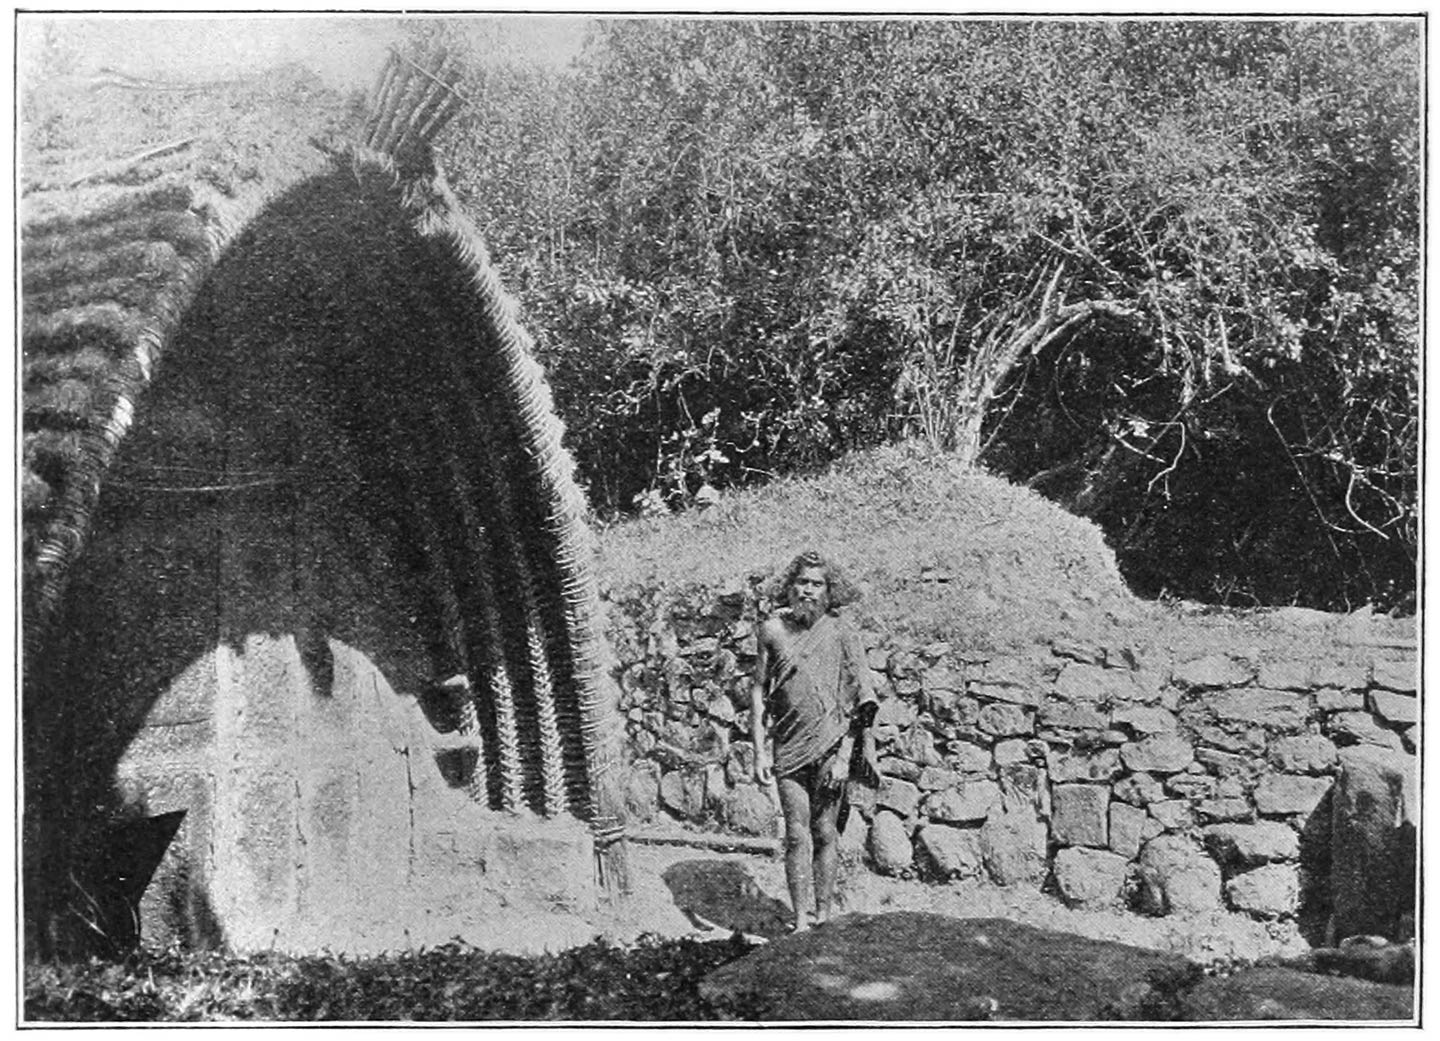 FIG. 31.—THE DAIRY OF KIUDR WITH THE ‘PALIKARTMOKH’ ETAMUDRI (58); ON THE RIGHT OF THE DAIRY ABOVE AND TO THE LEFT OF THE HEAD OF ETAMUDRI IS THE STONE CALLED ‘NEURZÜLNKARS,’ BY WHICH THE ‘PATATMANI’ IS LAID.